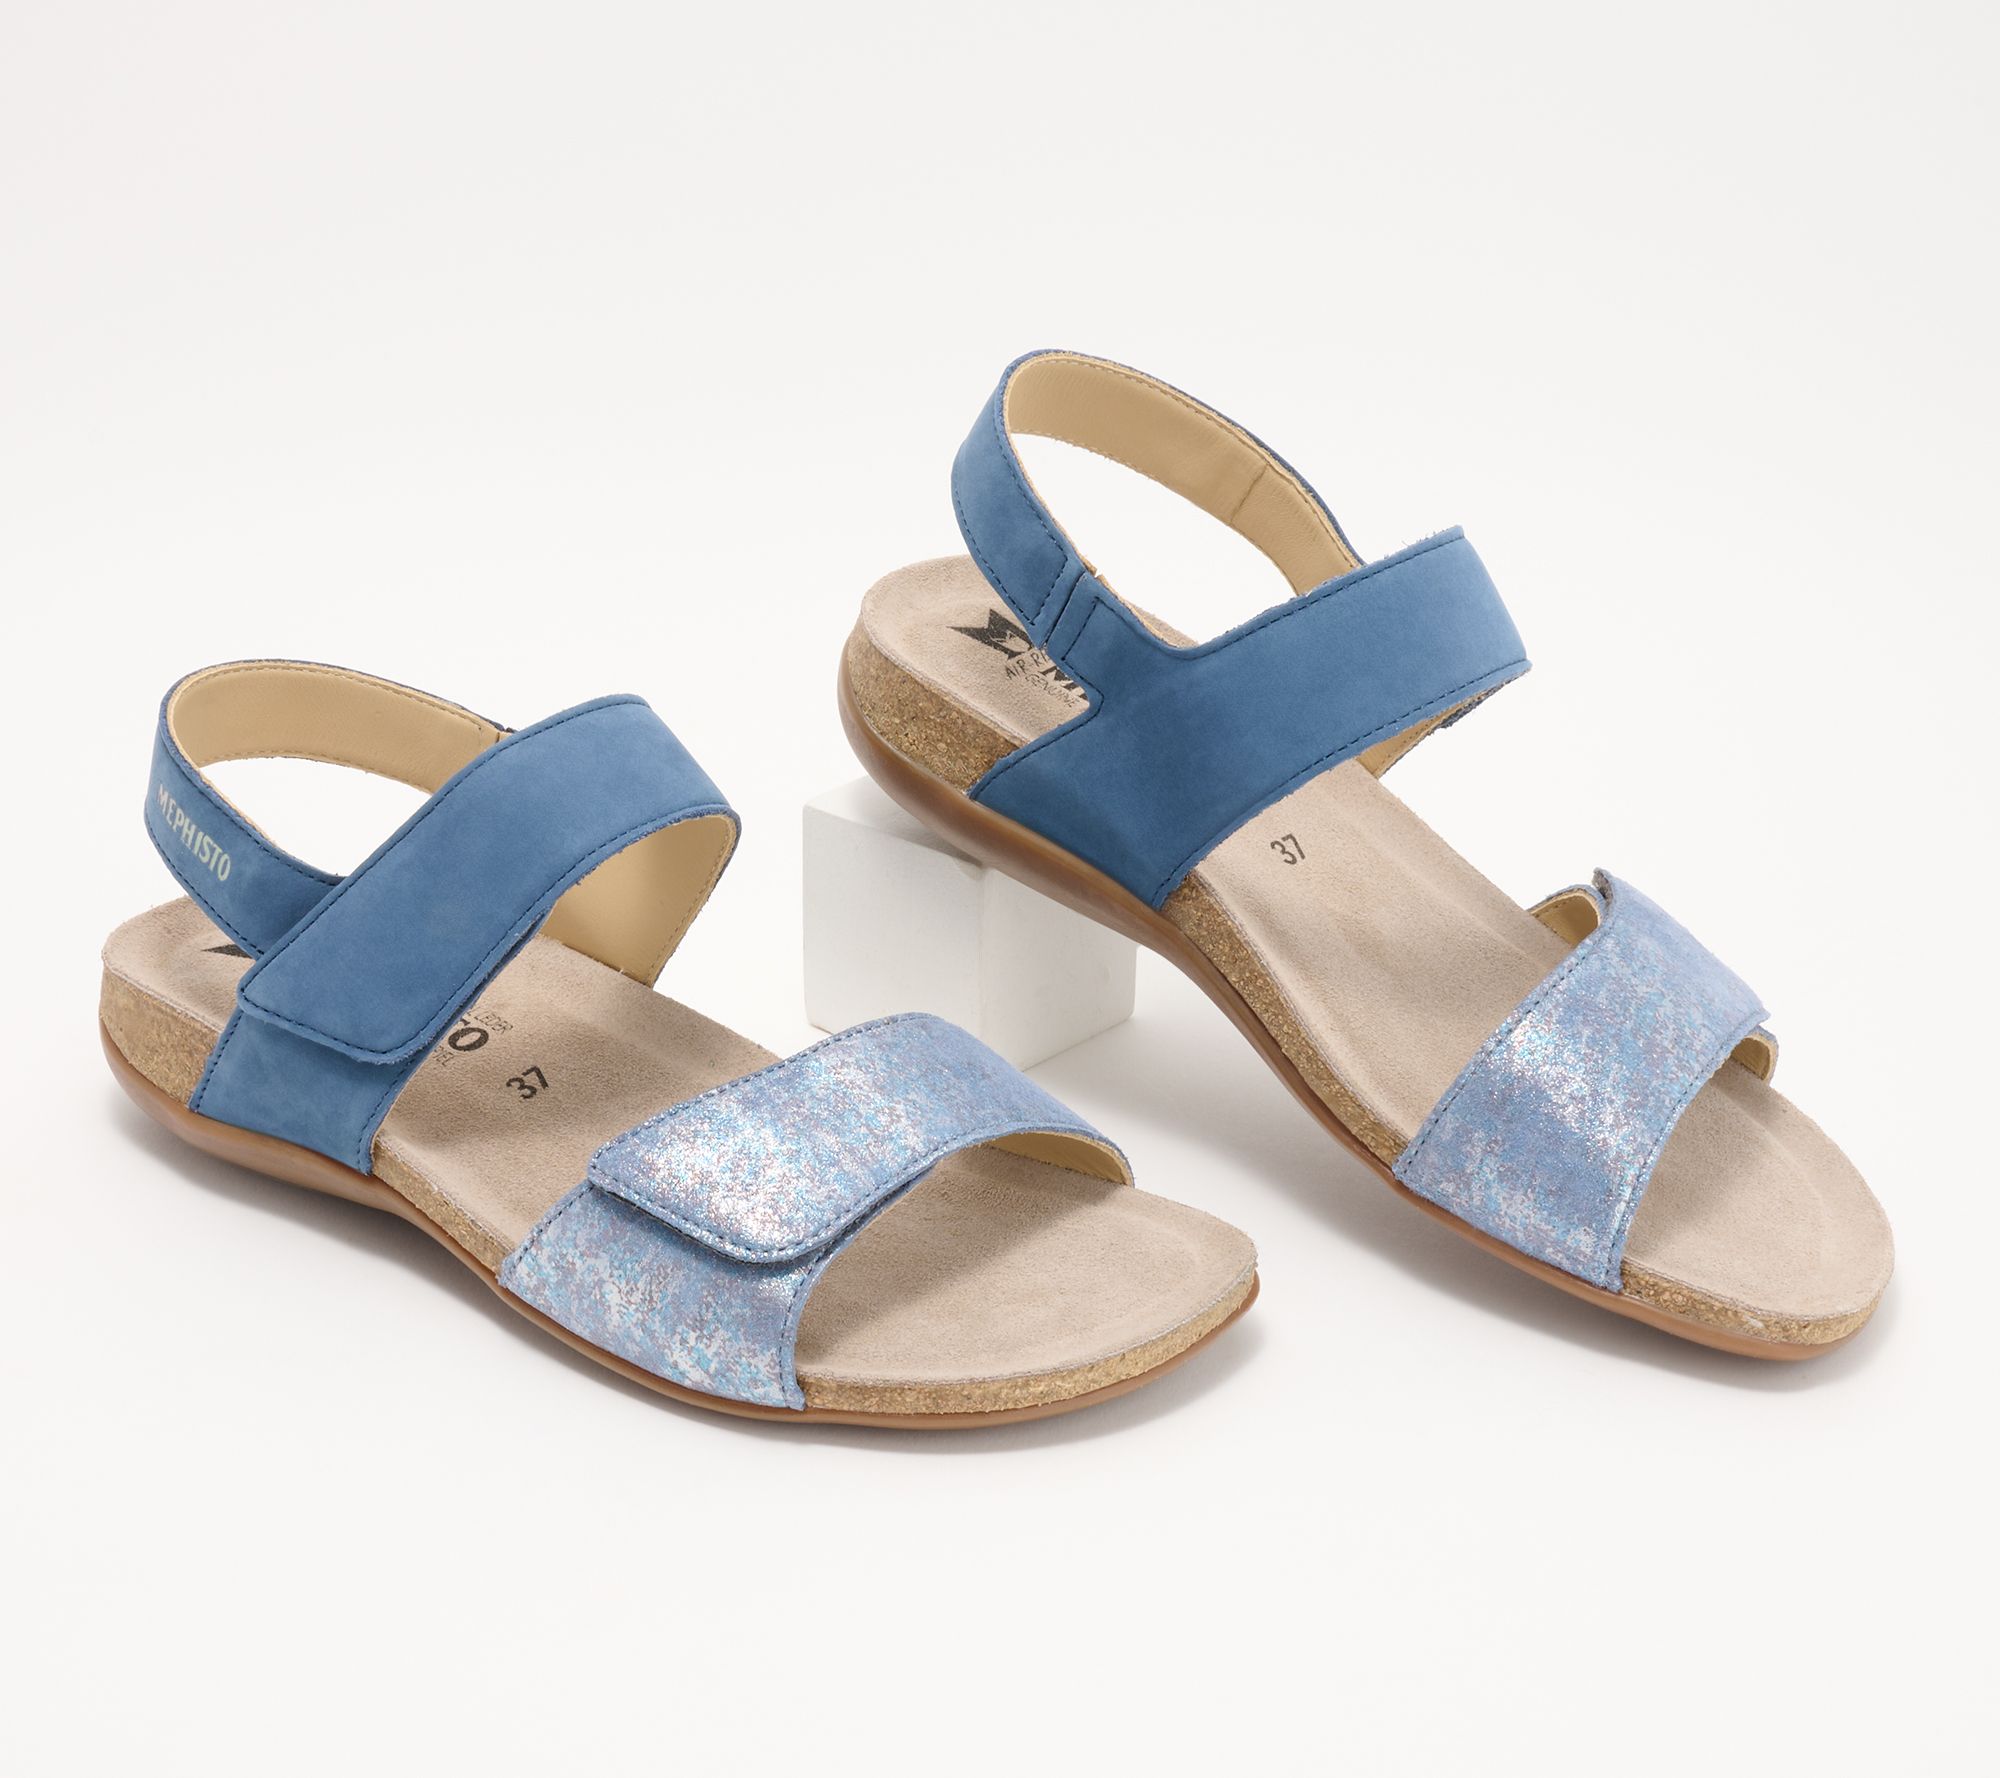 Mephisto Leather Adjustable Sandals - Agave - QVC.com